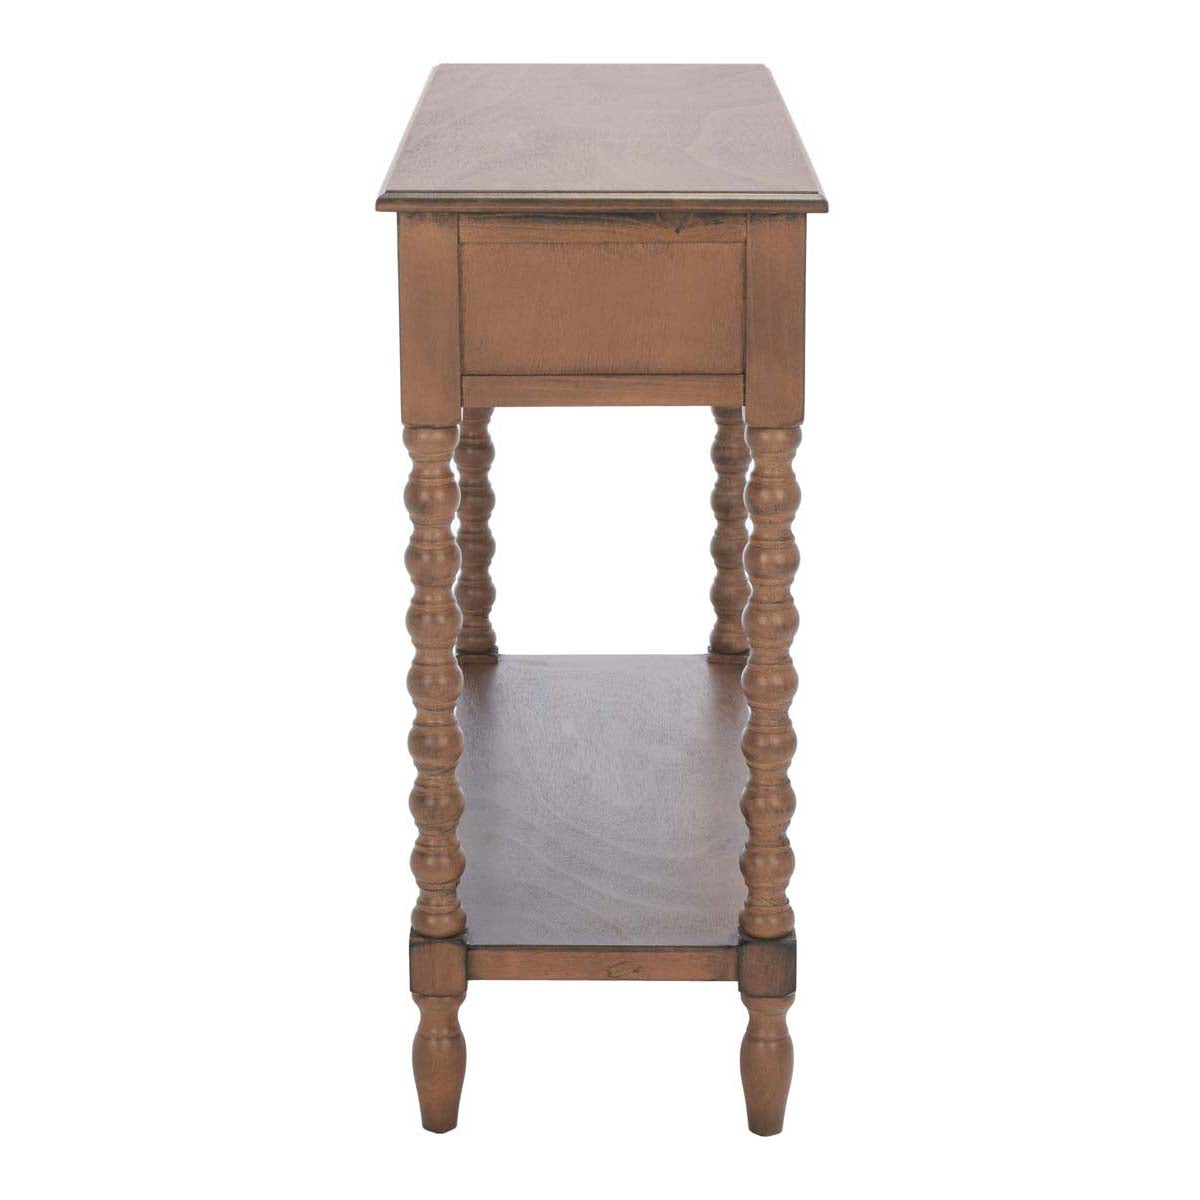 Safavieh Athena 2 Drawer Console Table, CNS5702 - Brown